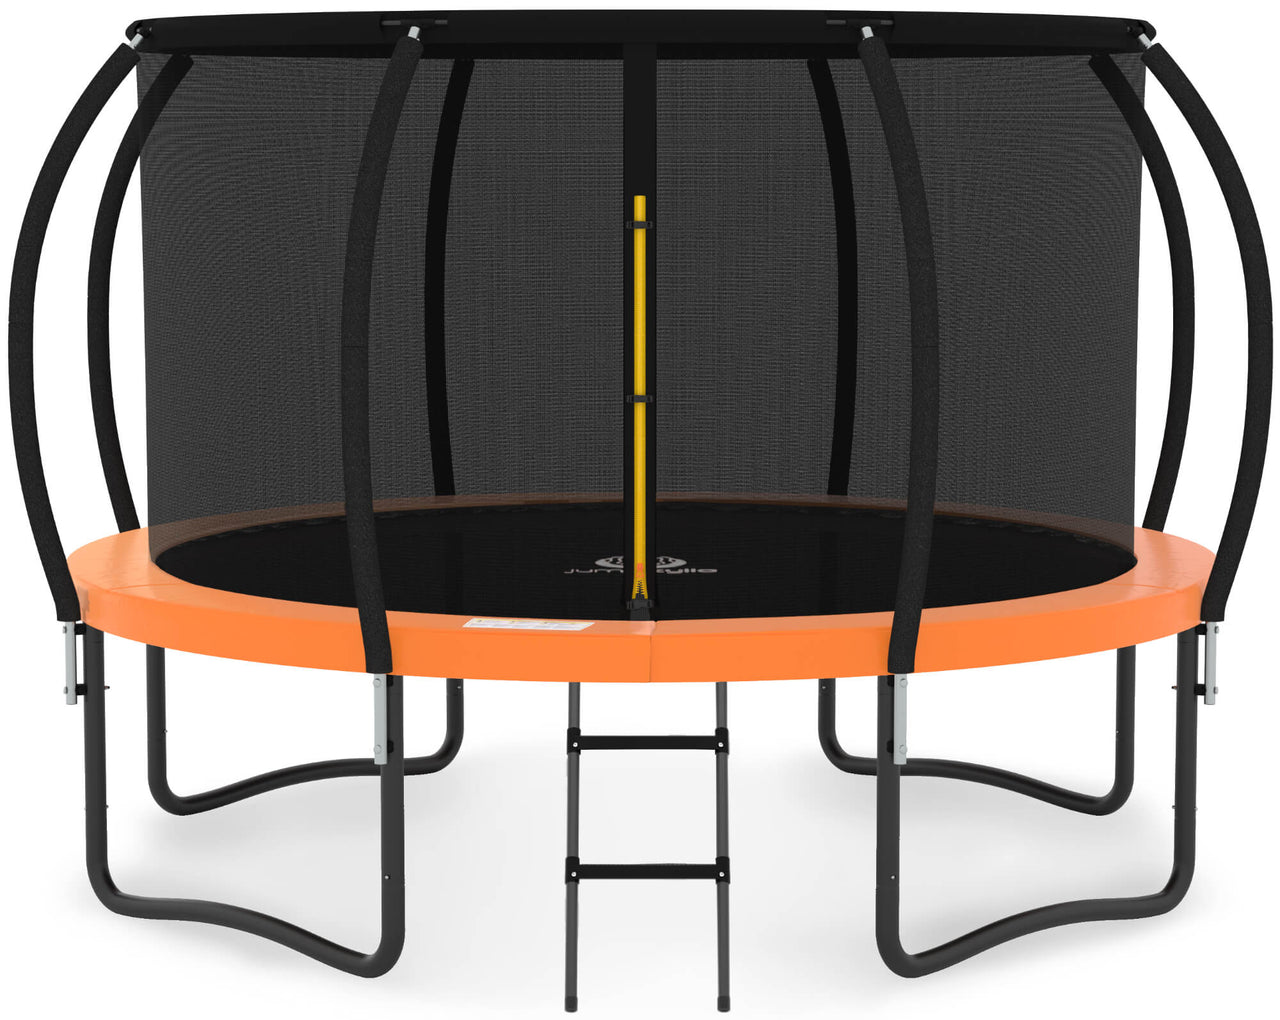 12ft x 12ft (144inx144in) Square Trampoline Mat With 116 Rings